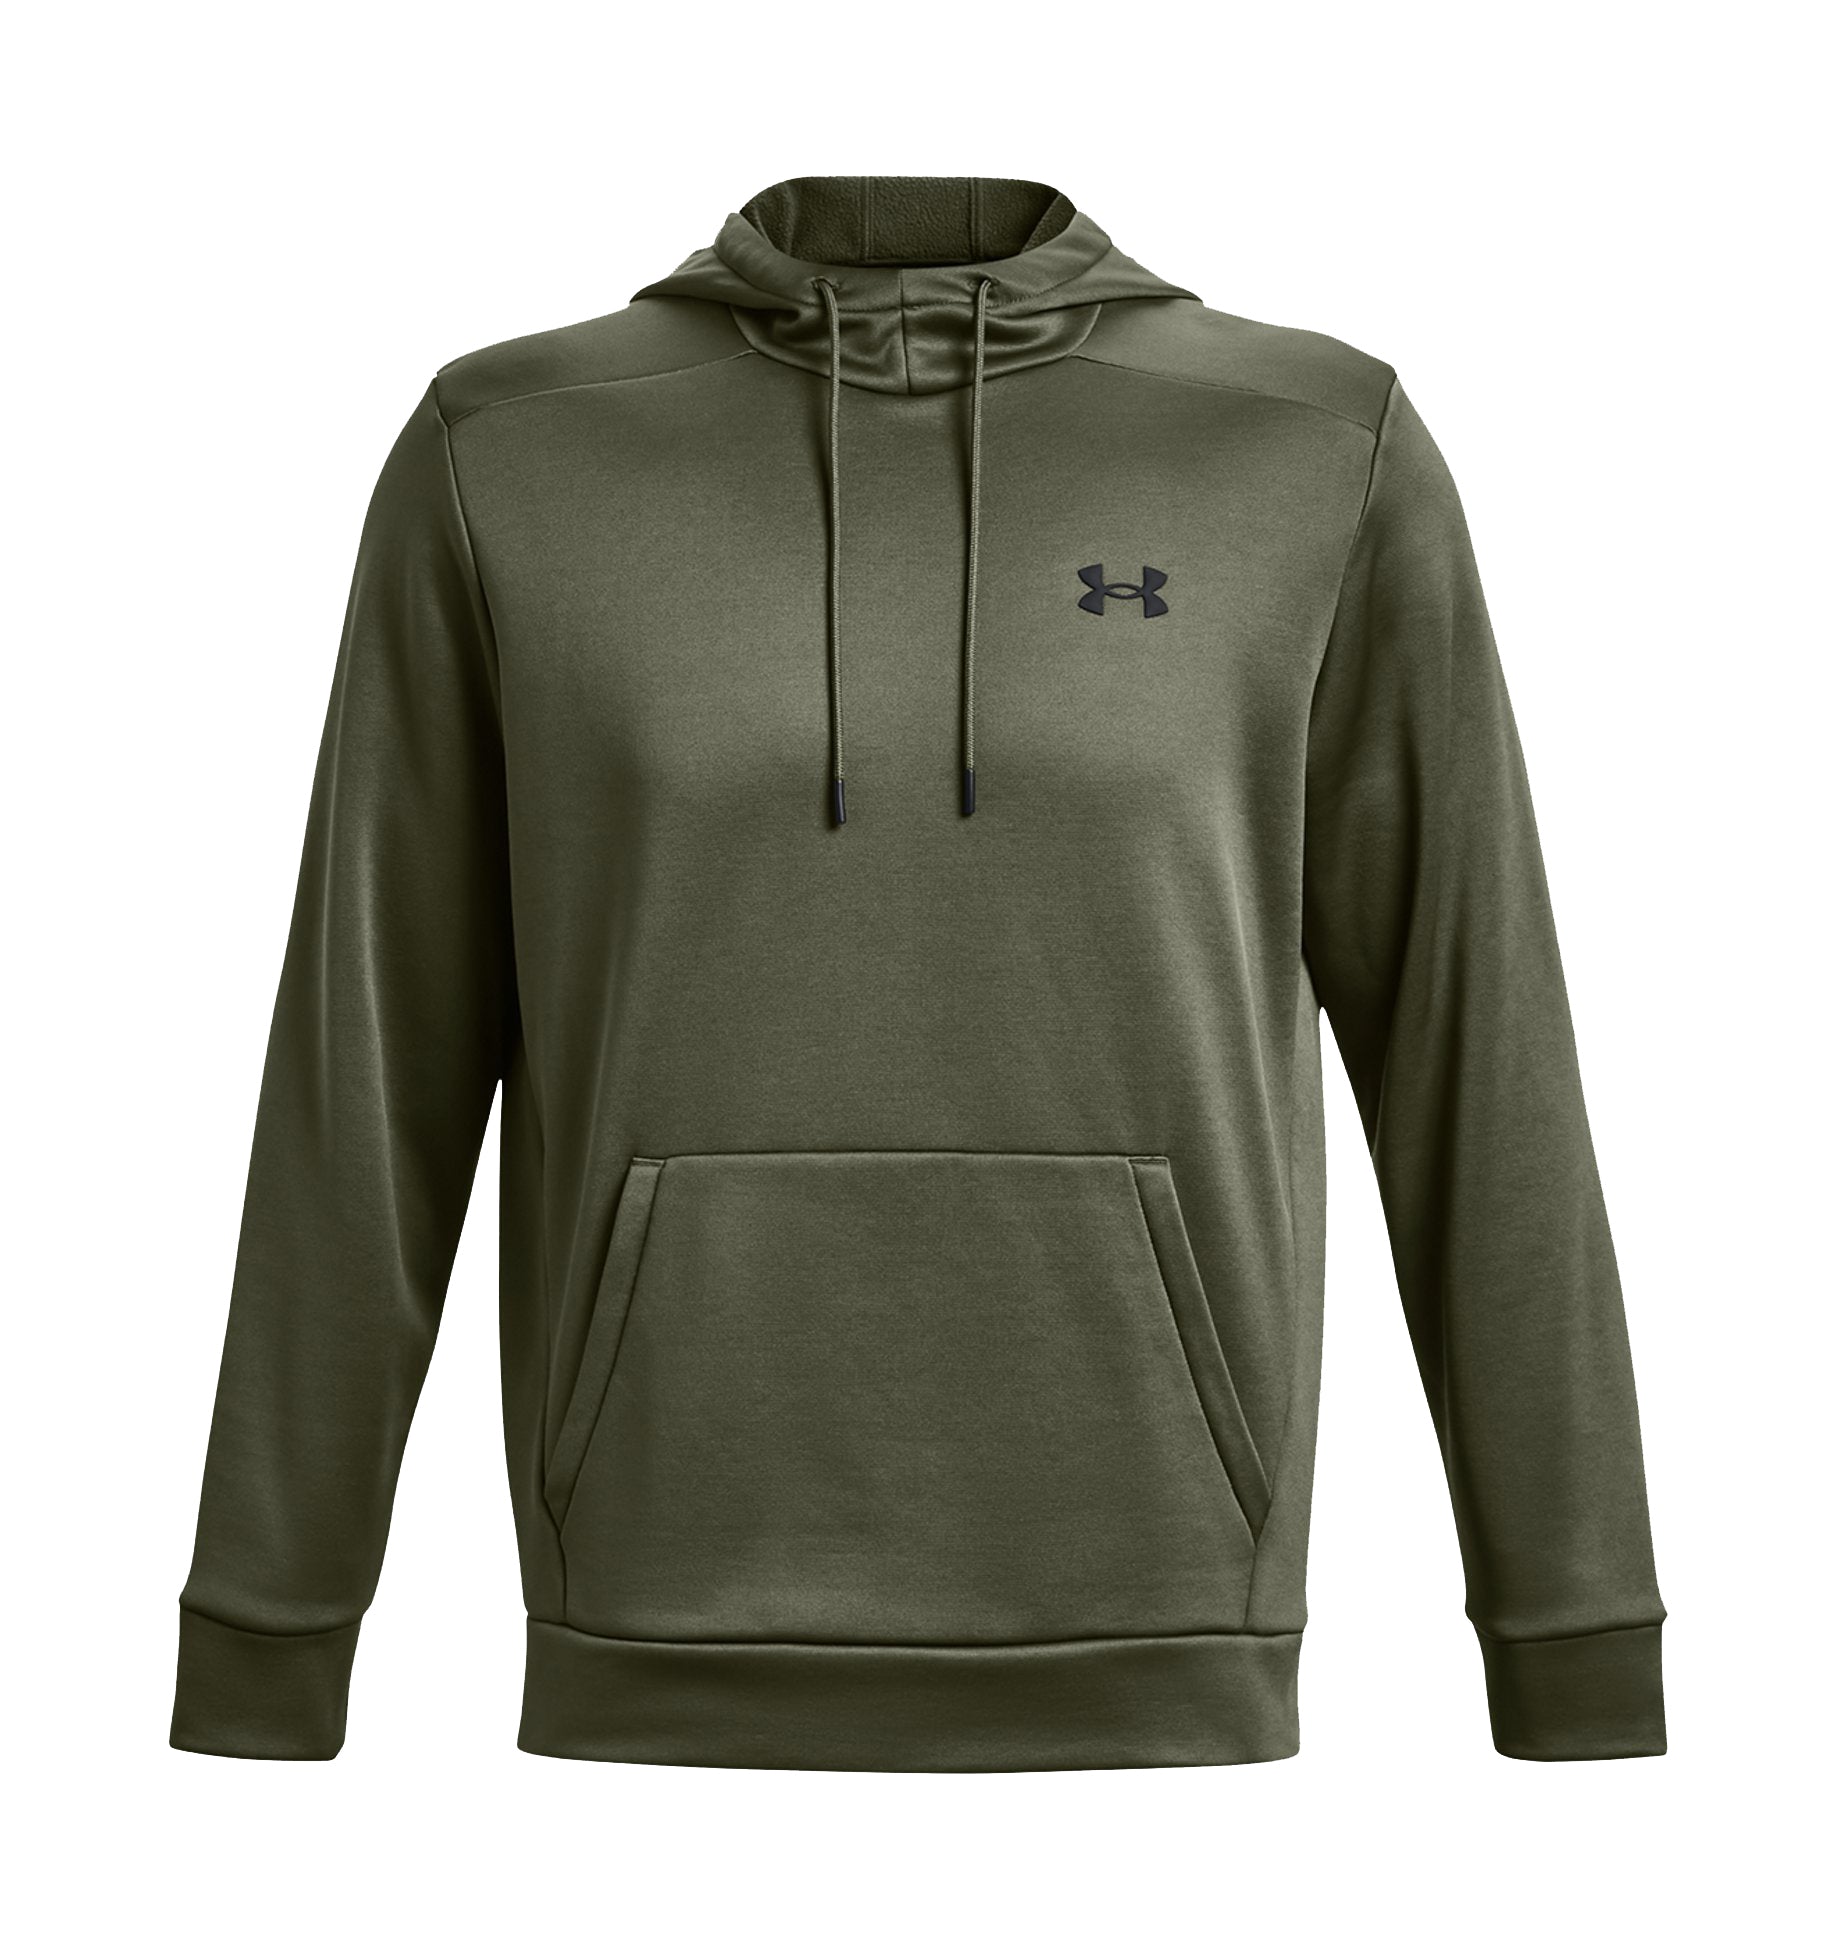 Under Armour GORE-TEX Shoreman Jacket – Natural Sports - The Fishing Store